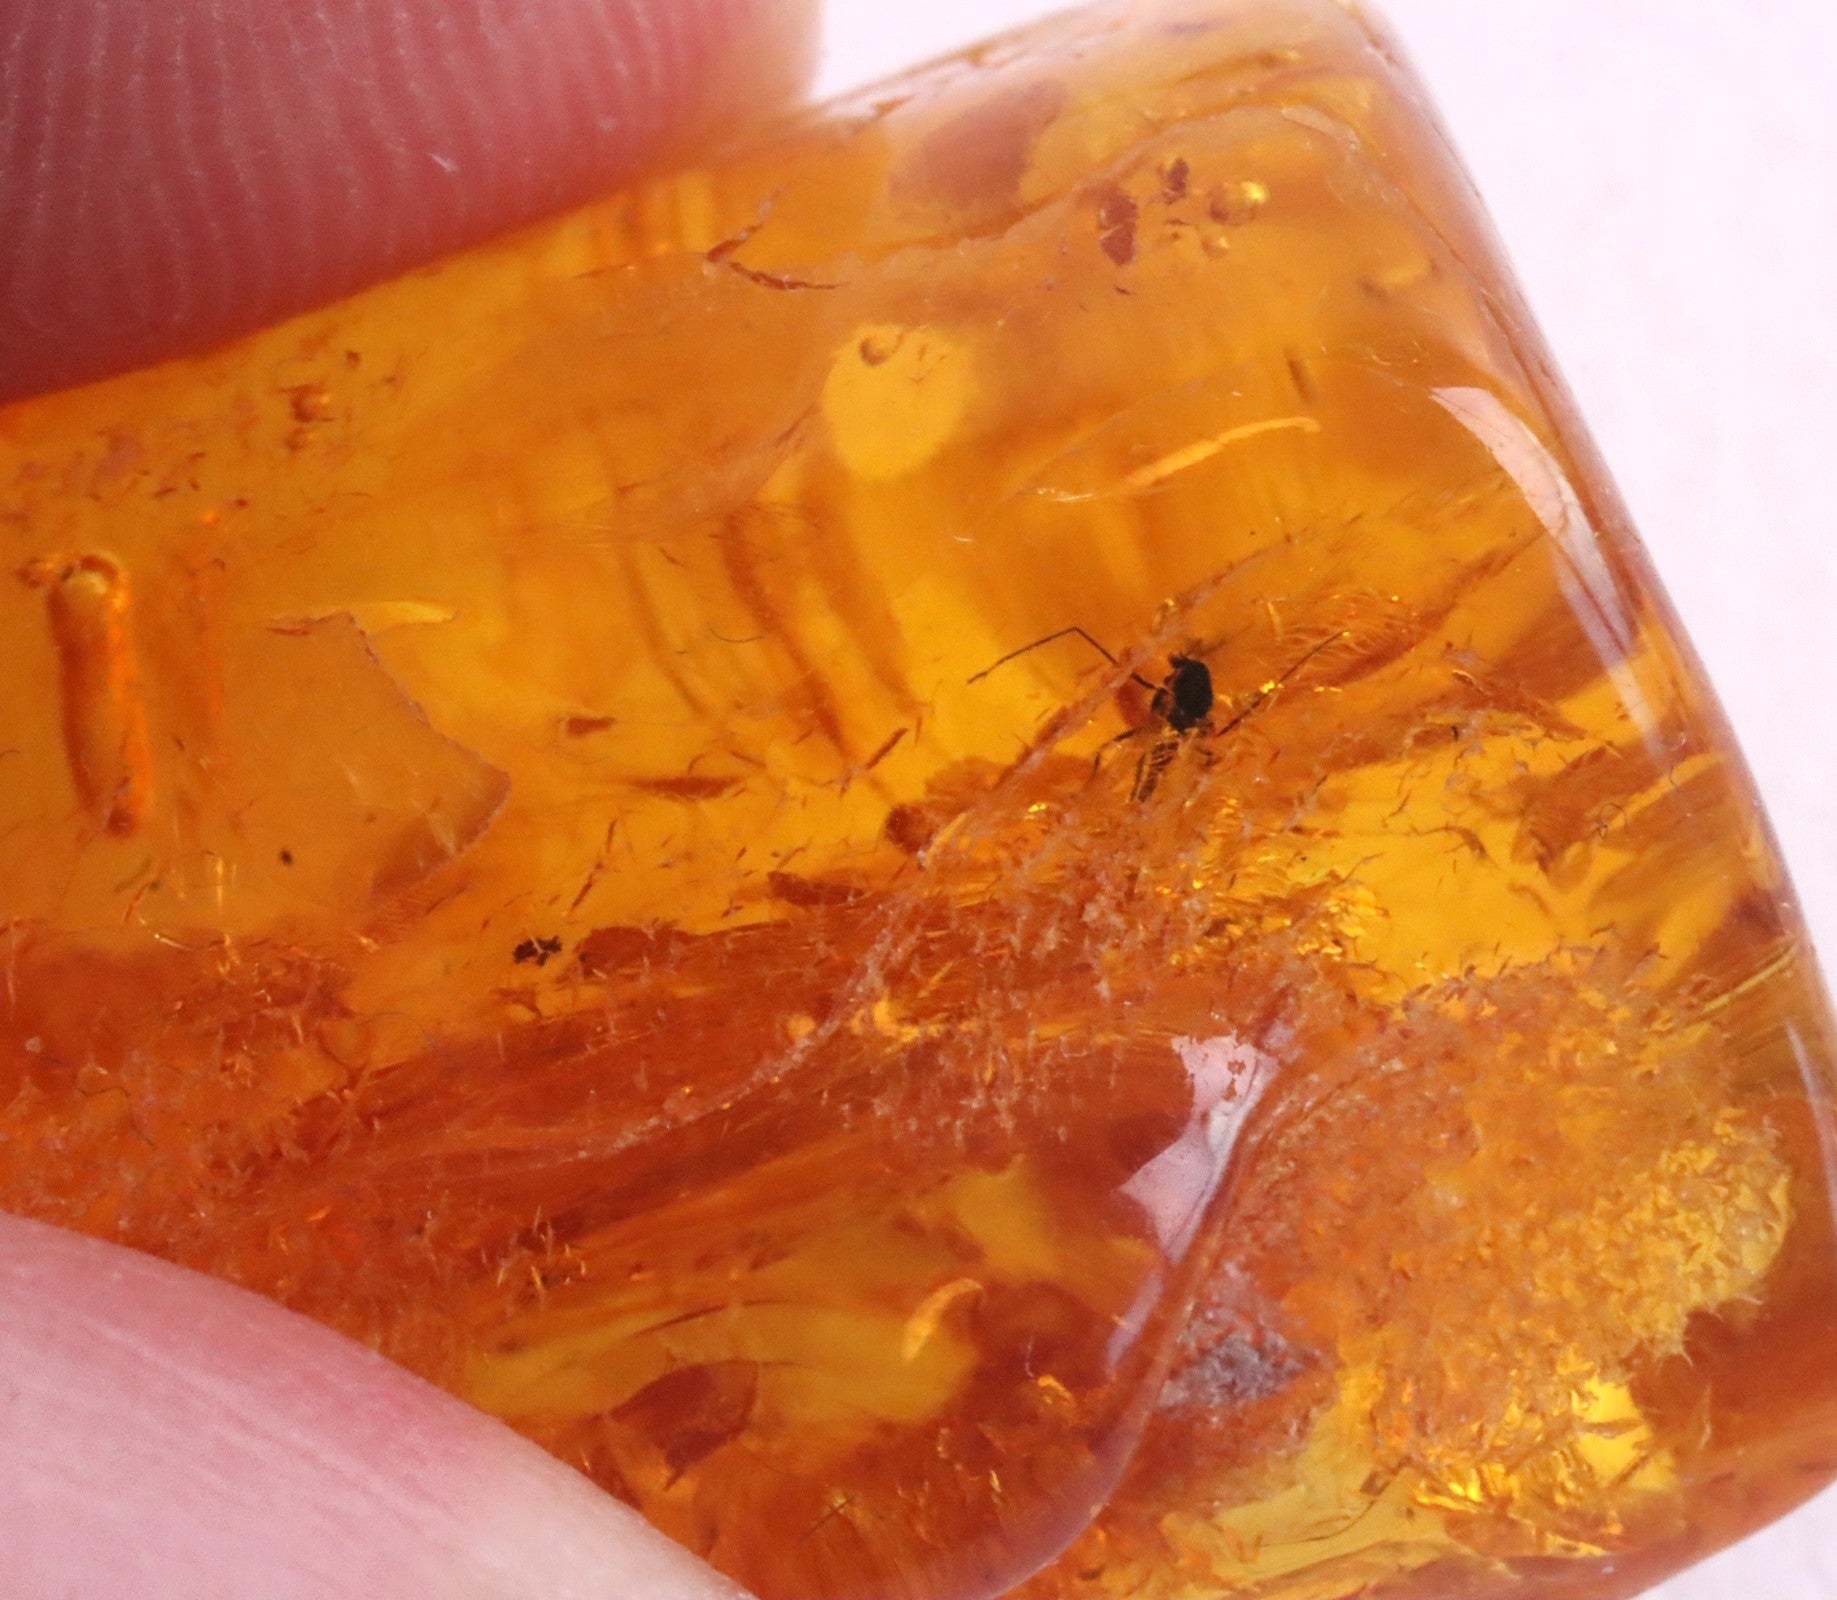 Baltic Amber Museum Collector's gem With Insects Inclusion